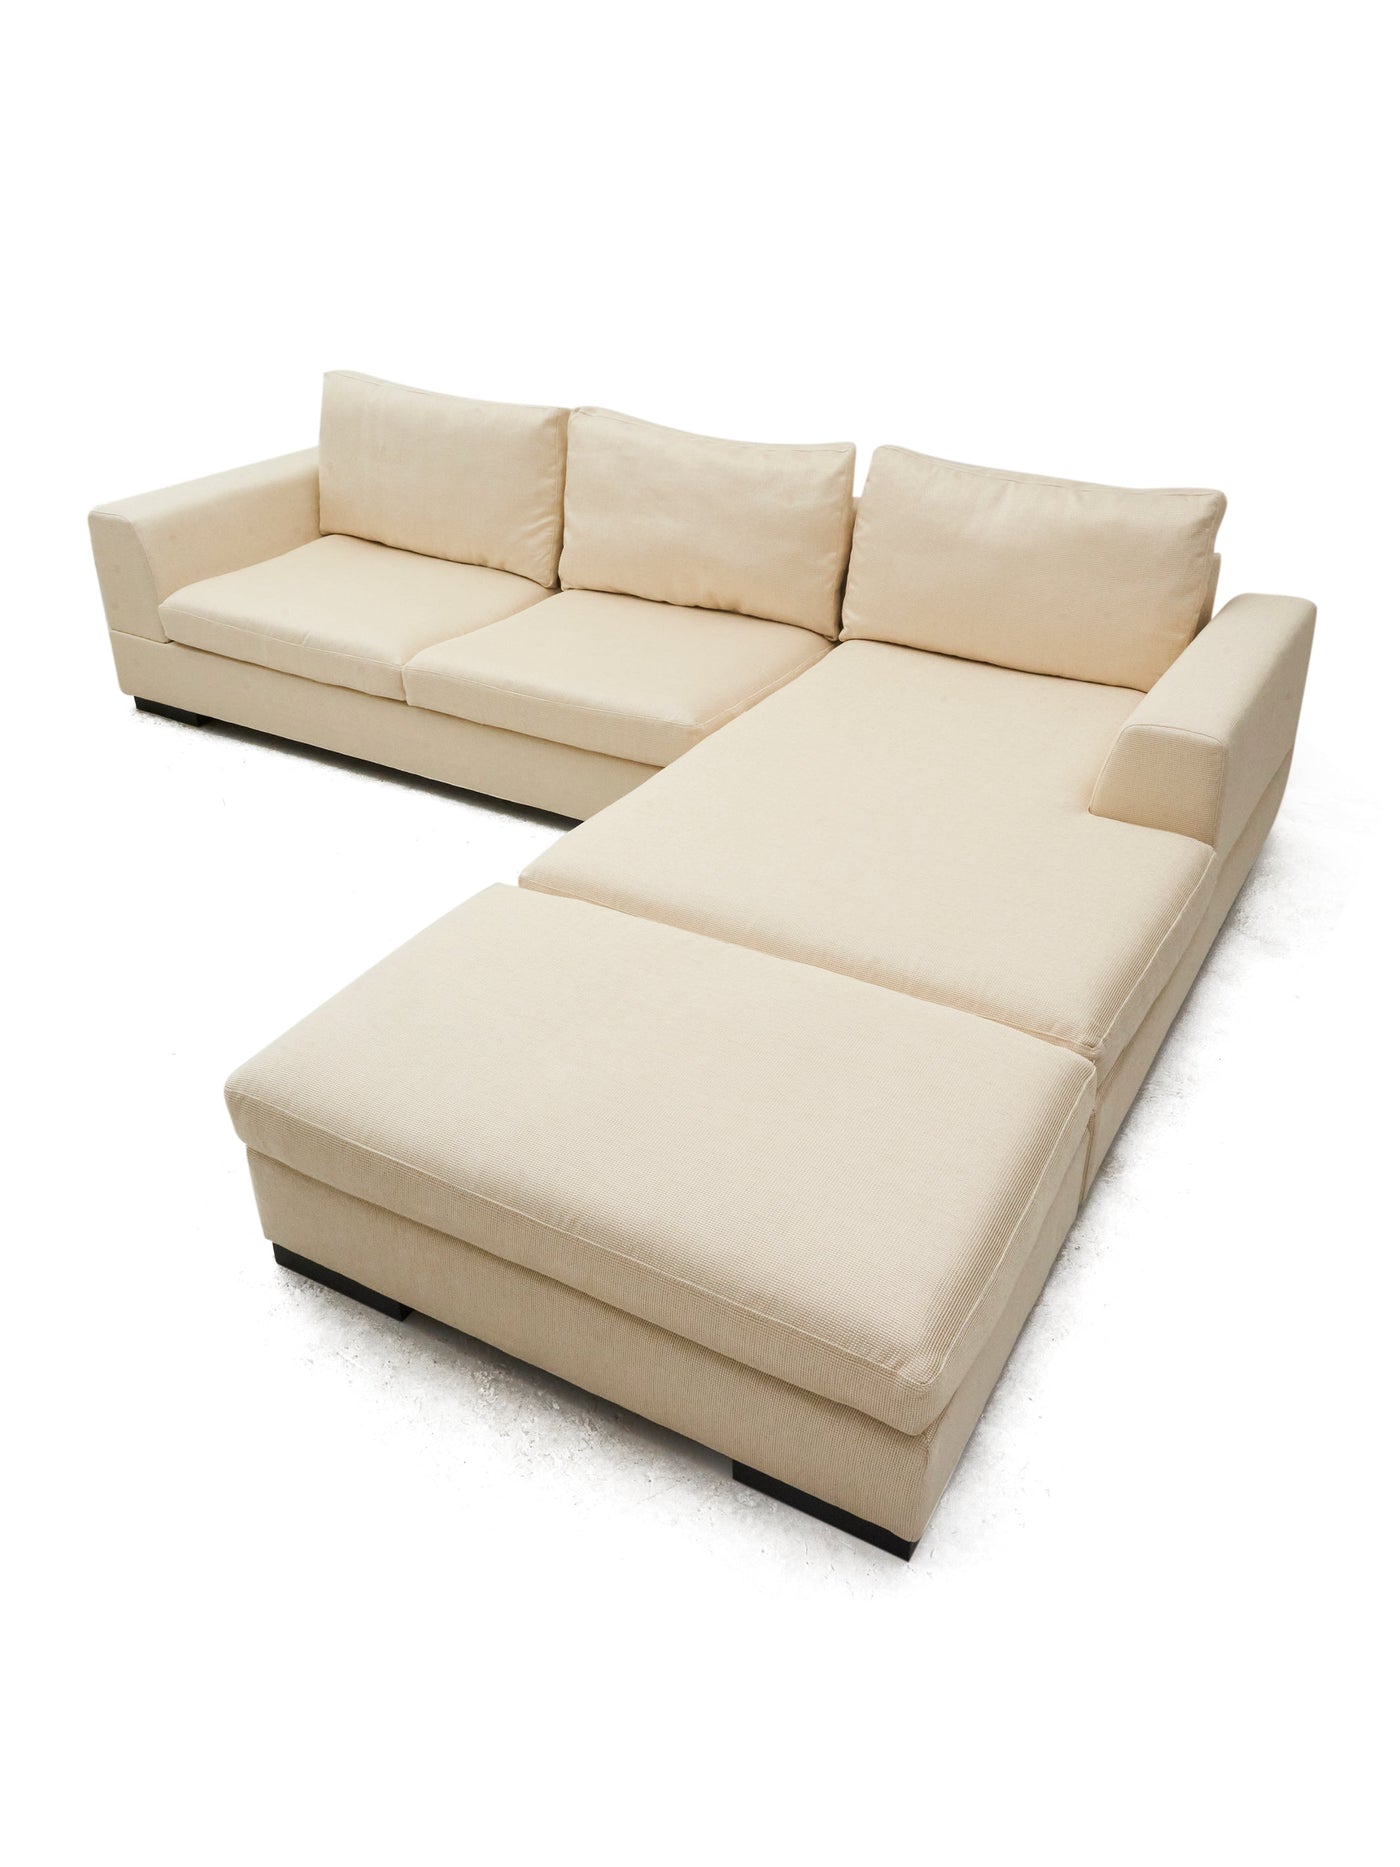 L-Shaped Sectional Sofa and Ottoman in Neutral